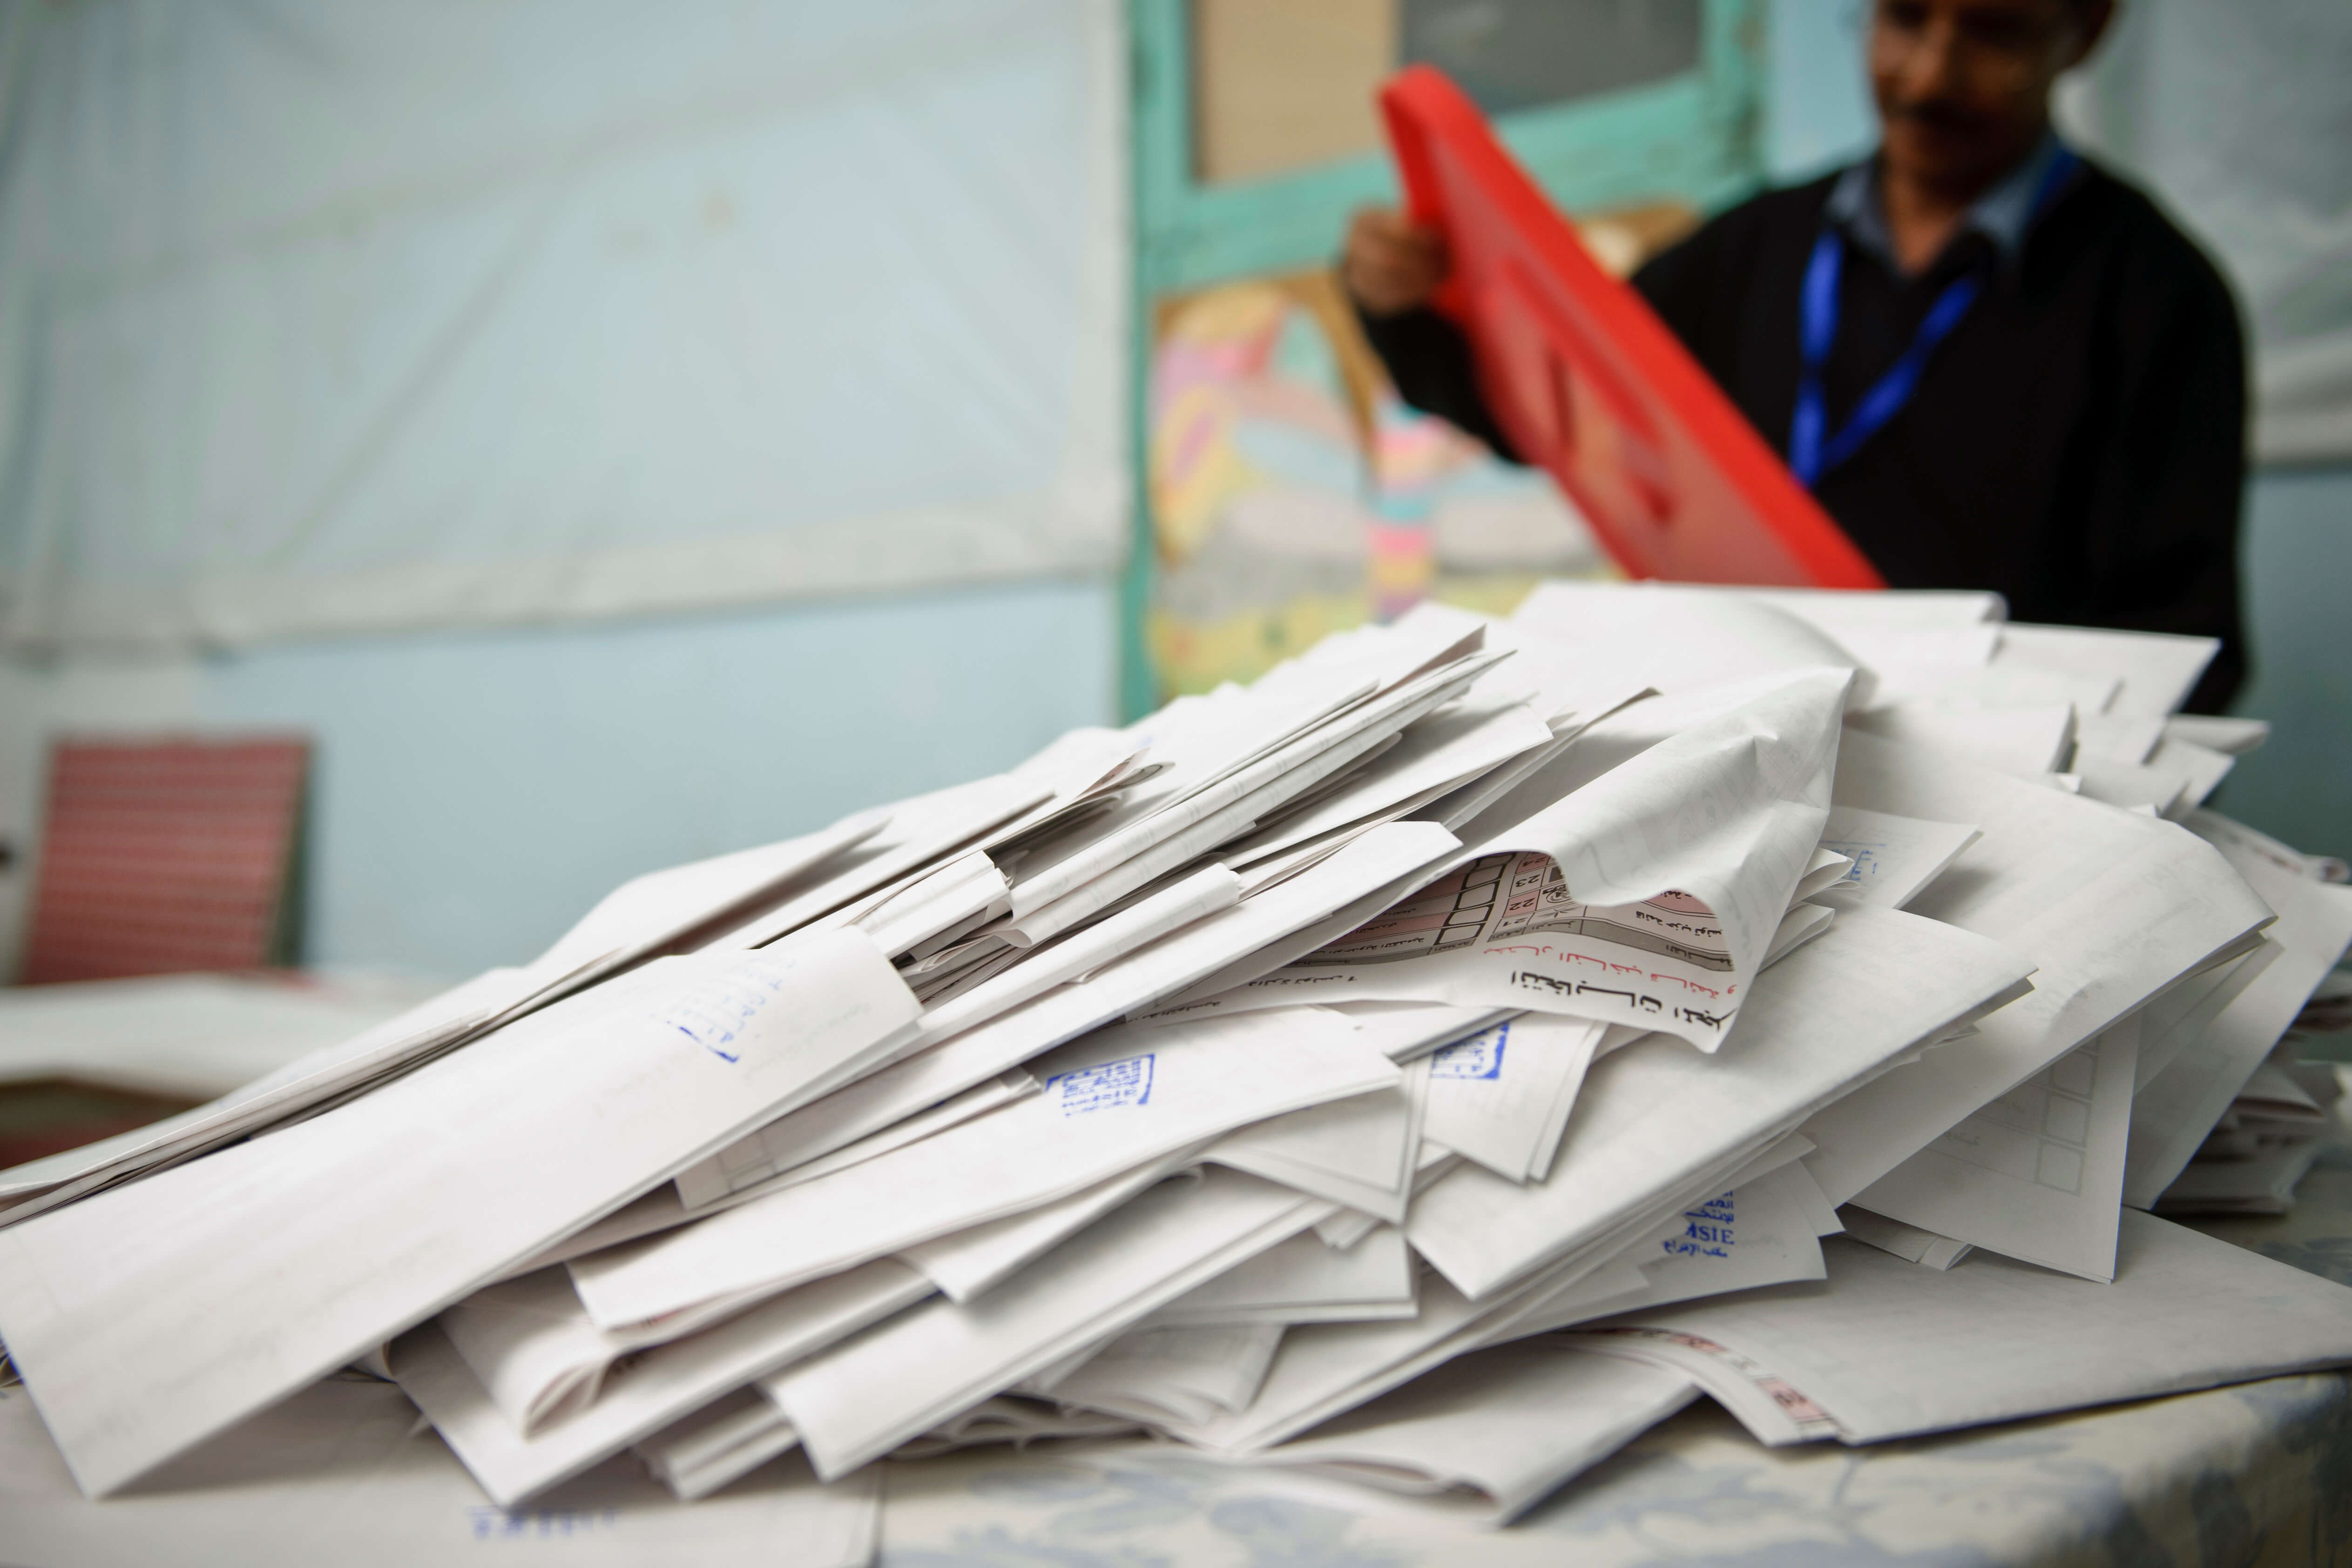 Ballots in a polling station in Tunis during the elections of 2011. ©European Parliament/Flickr